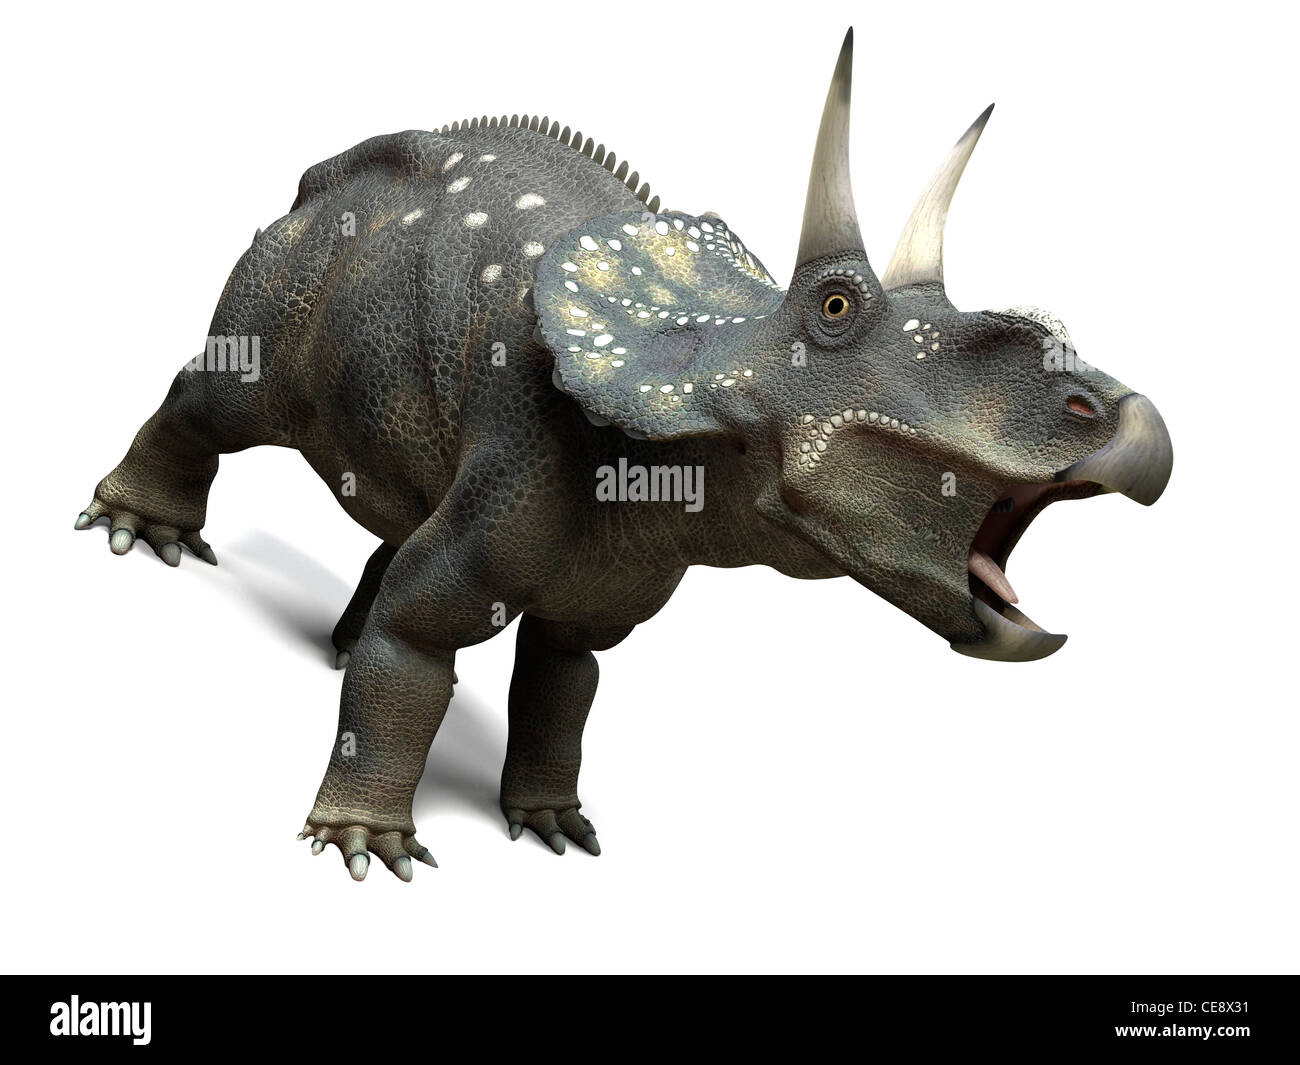 Nedoceratops dinosaur computer artwork dinosaur formerly known Diceratops lived 70 million years ago Cretaceous period. Stock Photo